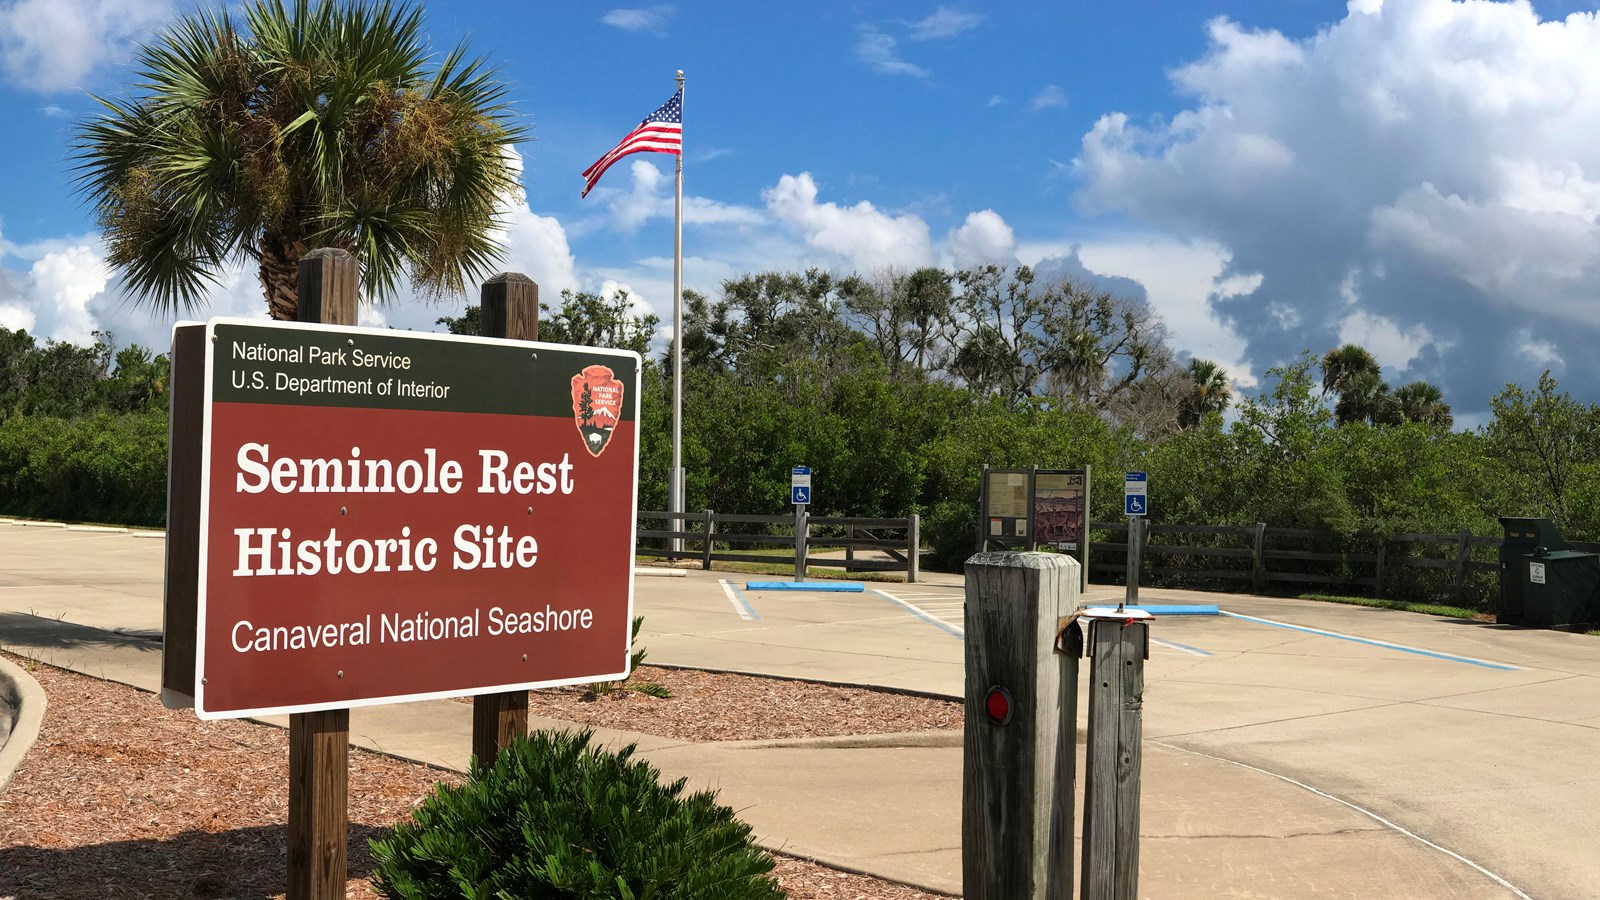 Seminole Rest sign and parking lot.